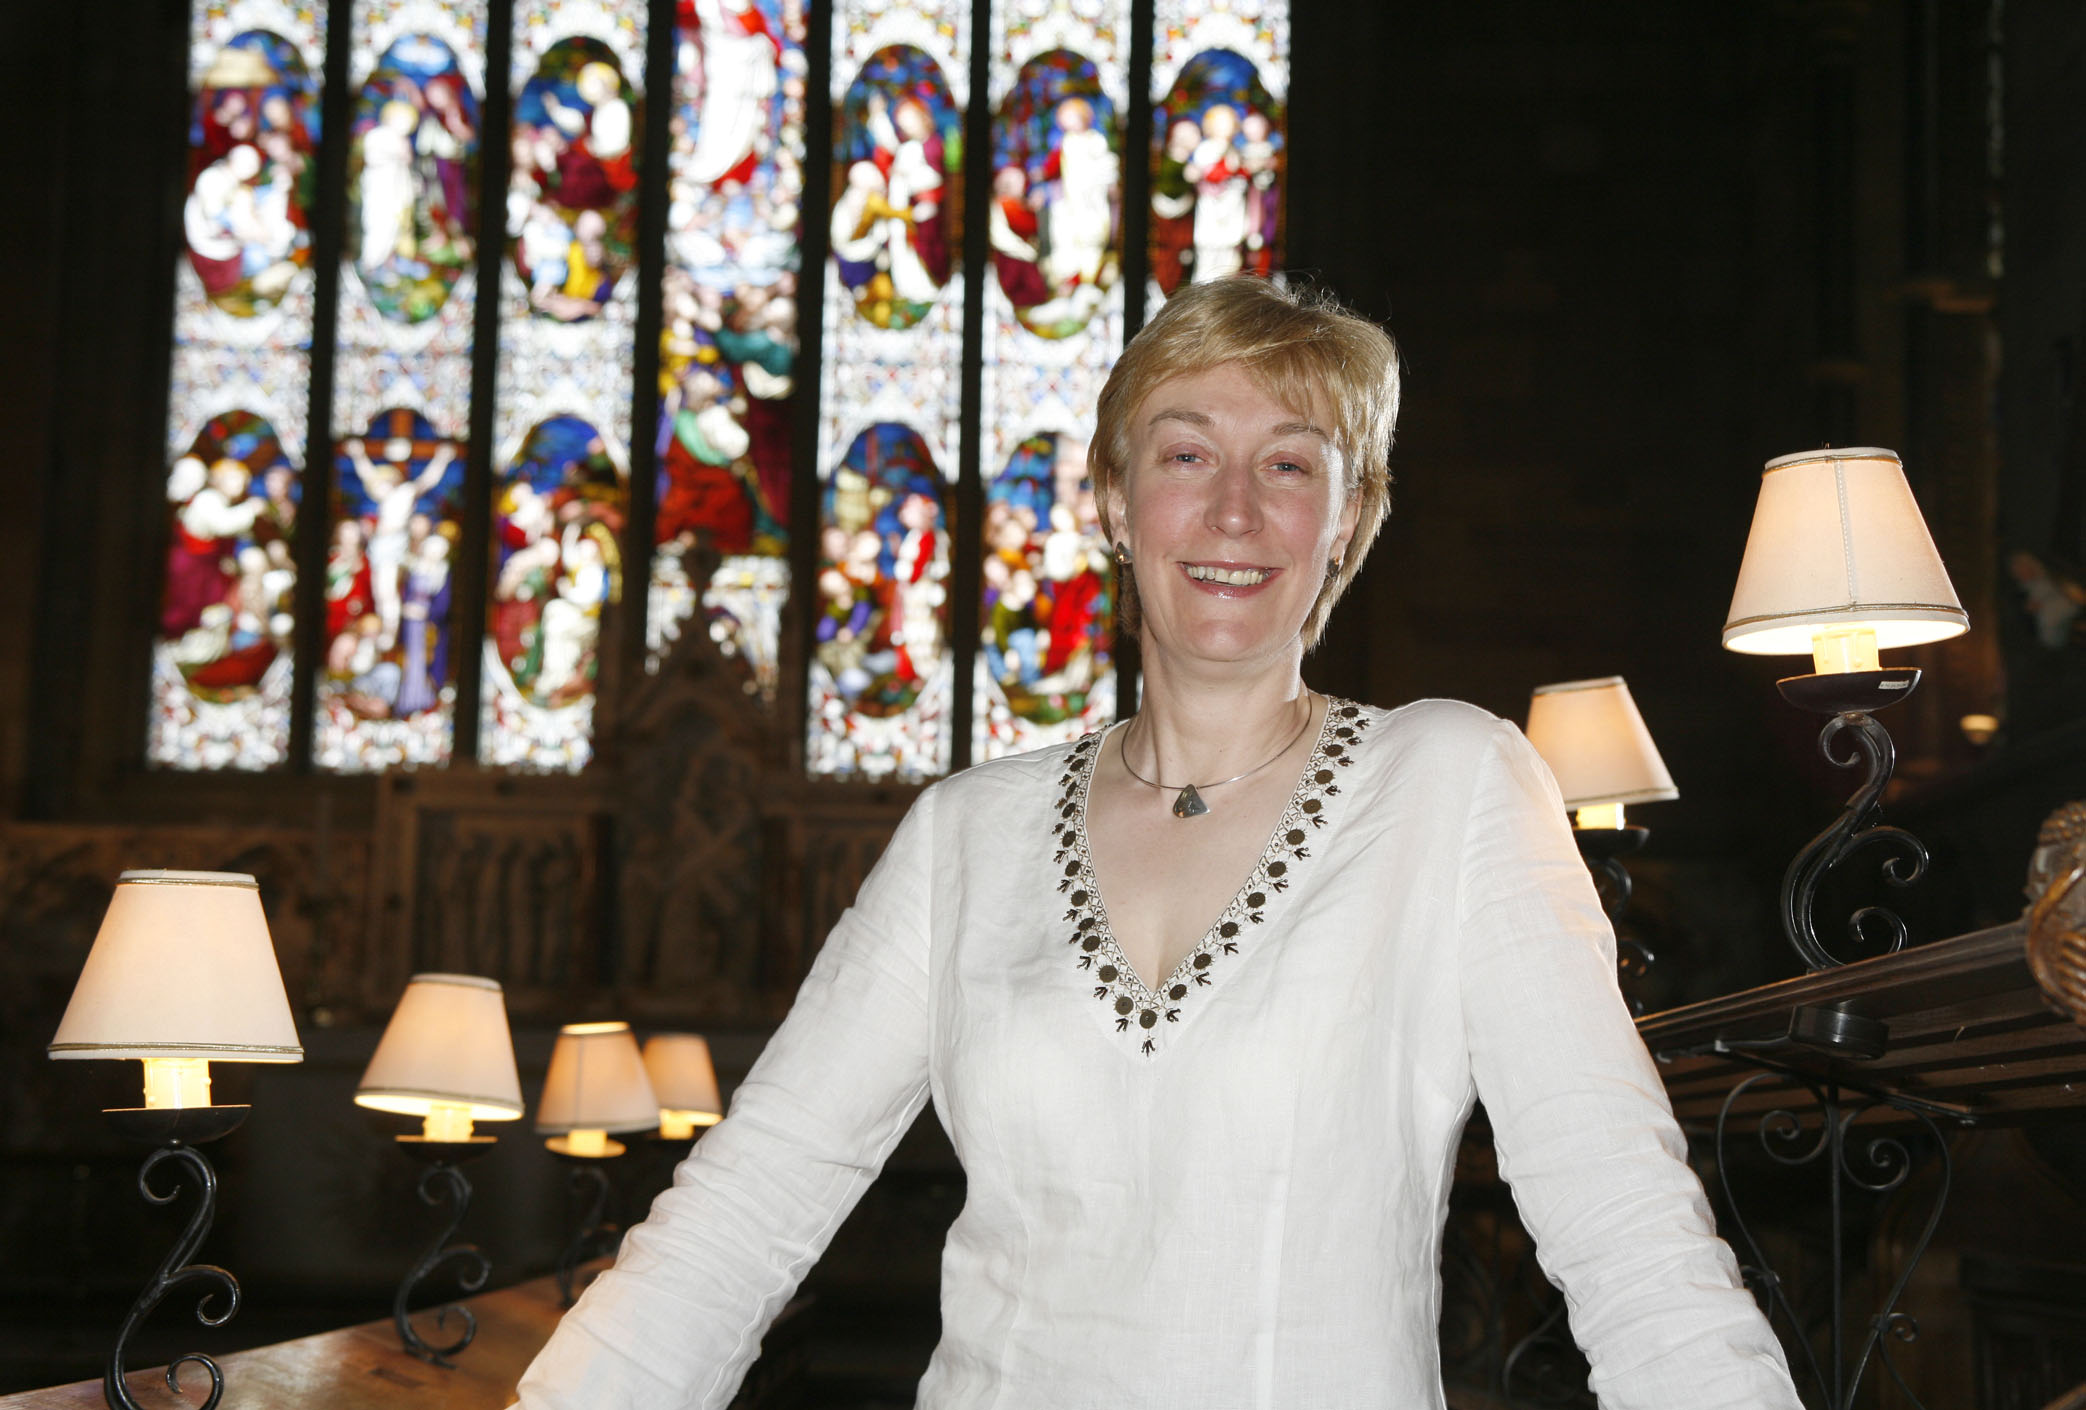 Ann arranges sublime cathedral concert to mark her big birthday and raise cash for music festival